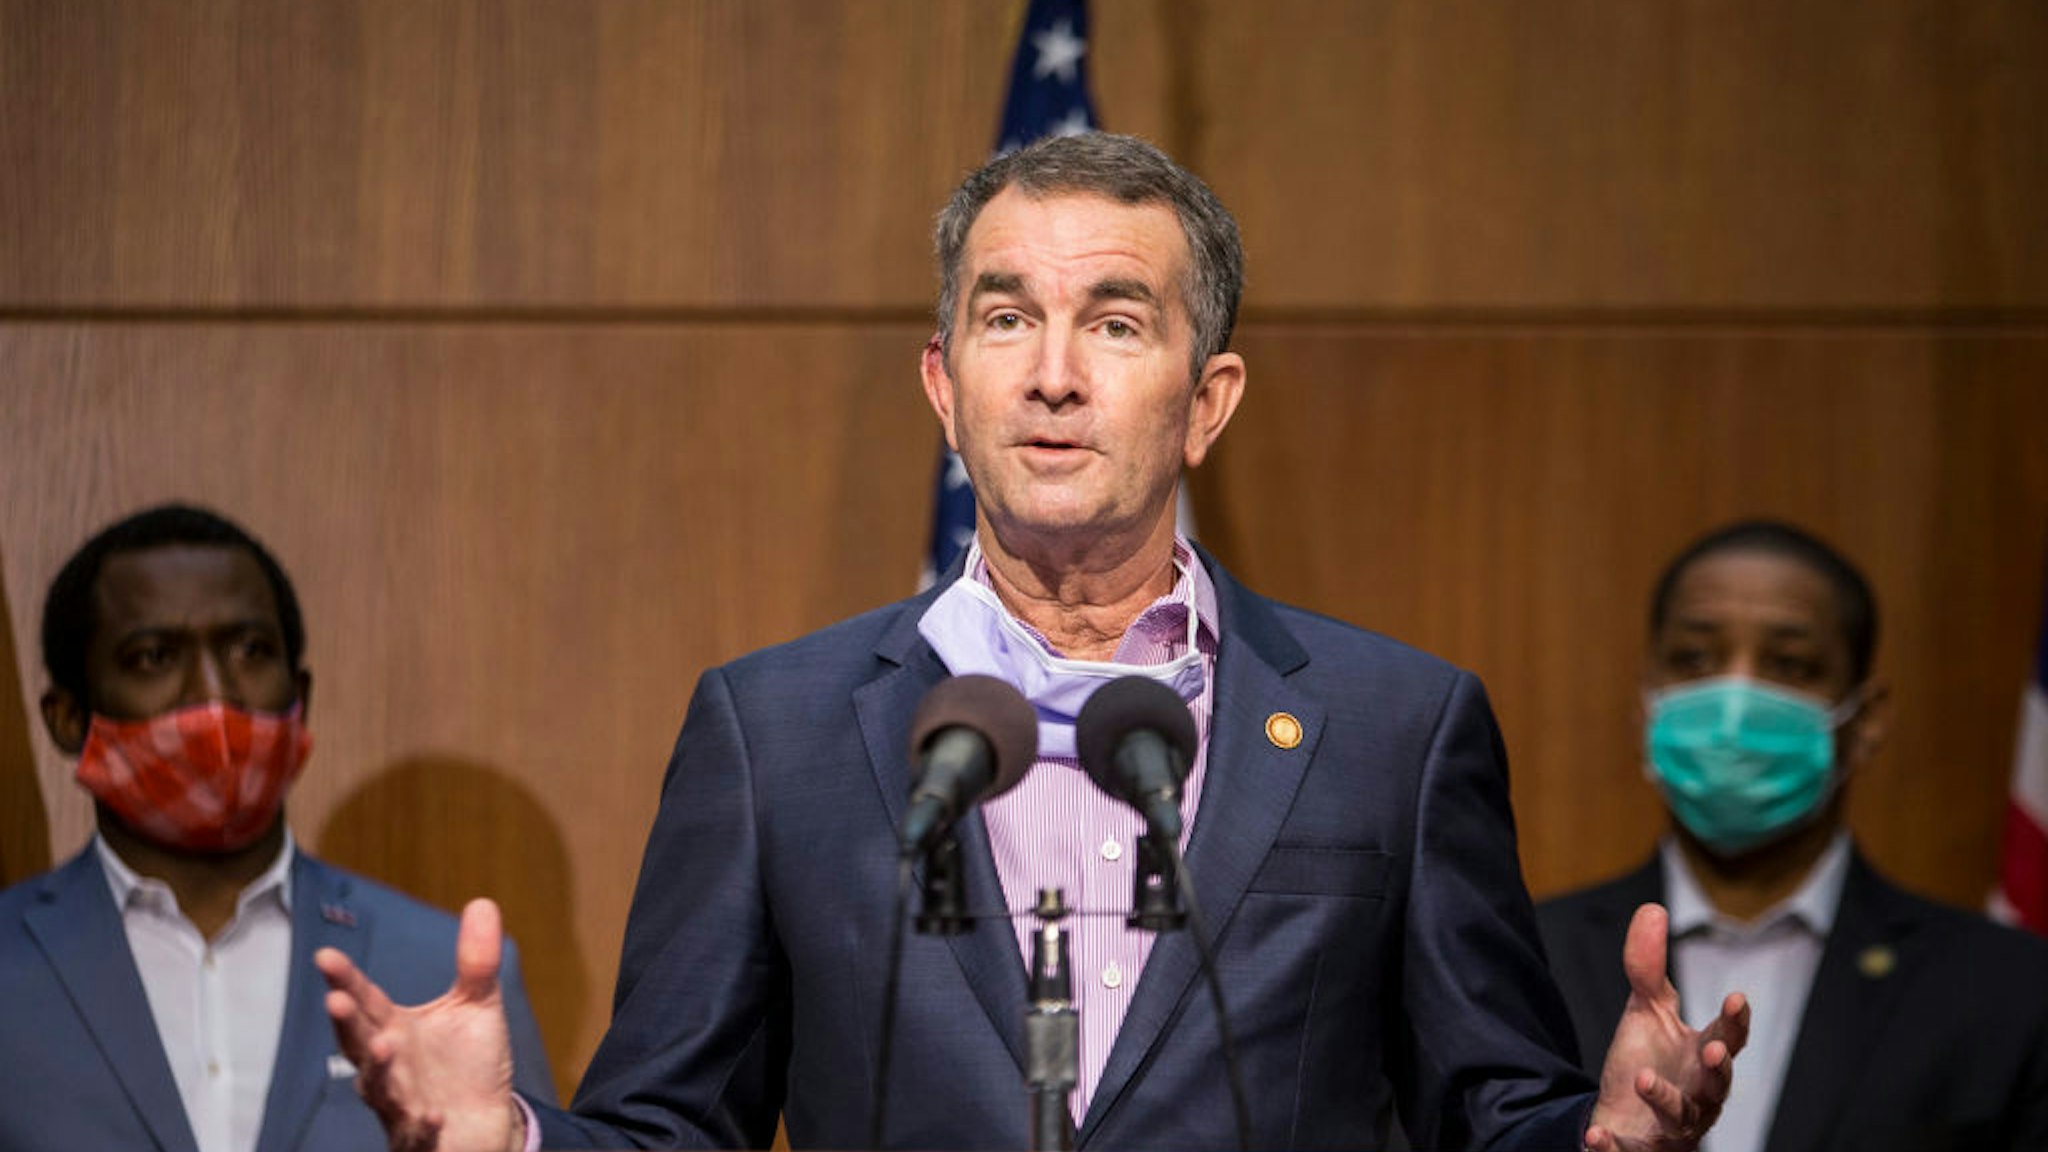 Virginia Gov. Ralph Northam (D) speaks during a news conference on June 4, 2020 in Richmond, Virginia.